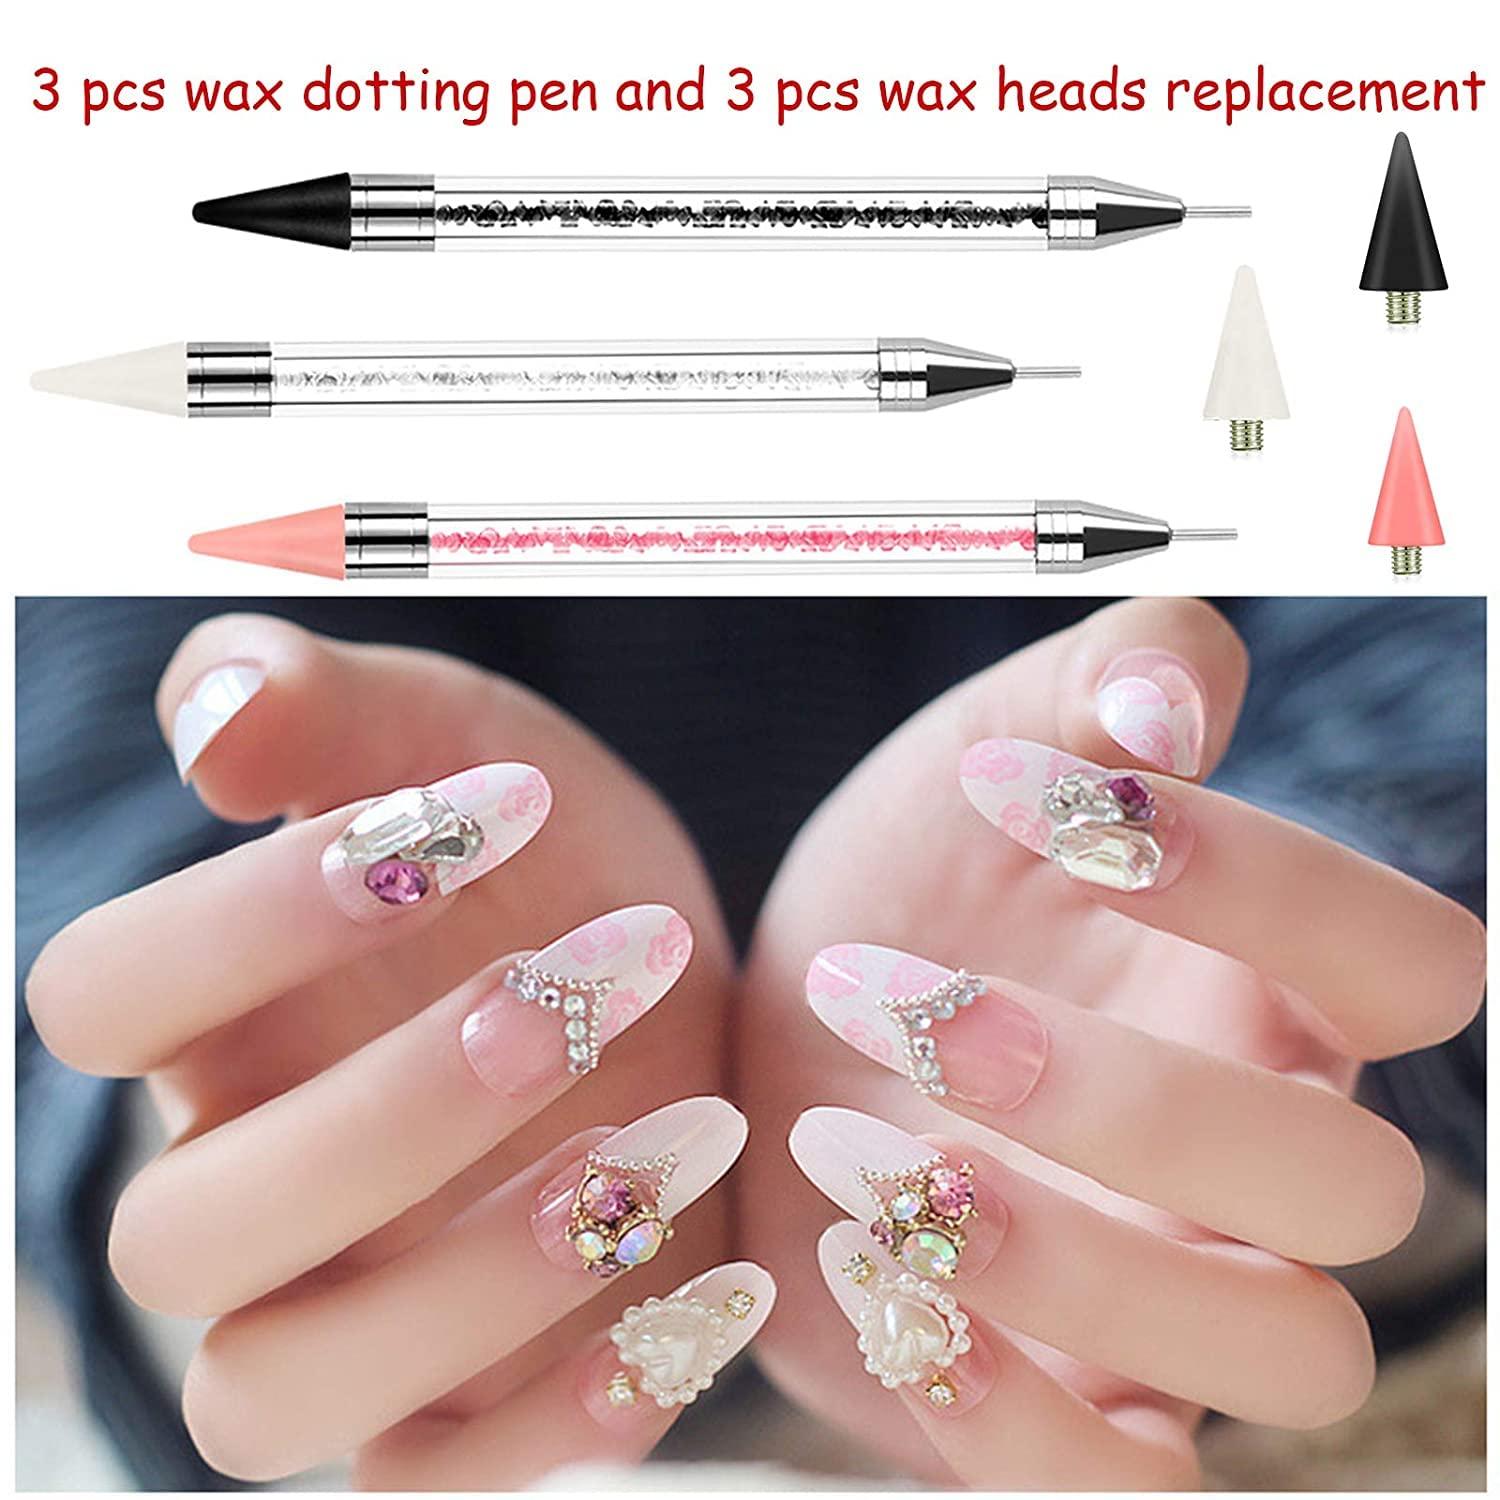 Wax Pencil for Rhinestones Acrylic Handle Dual End Rhinestone Picker  Dotting Pen with Extra 3 Wax Pen Tips Crystal Gemstone Applicator Tool for Nail  Art 3 pieces